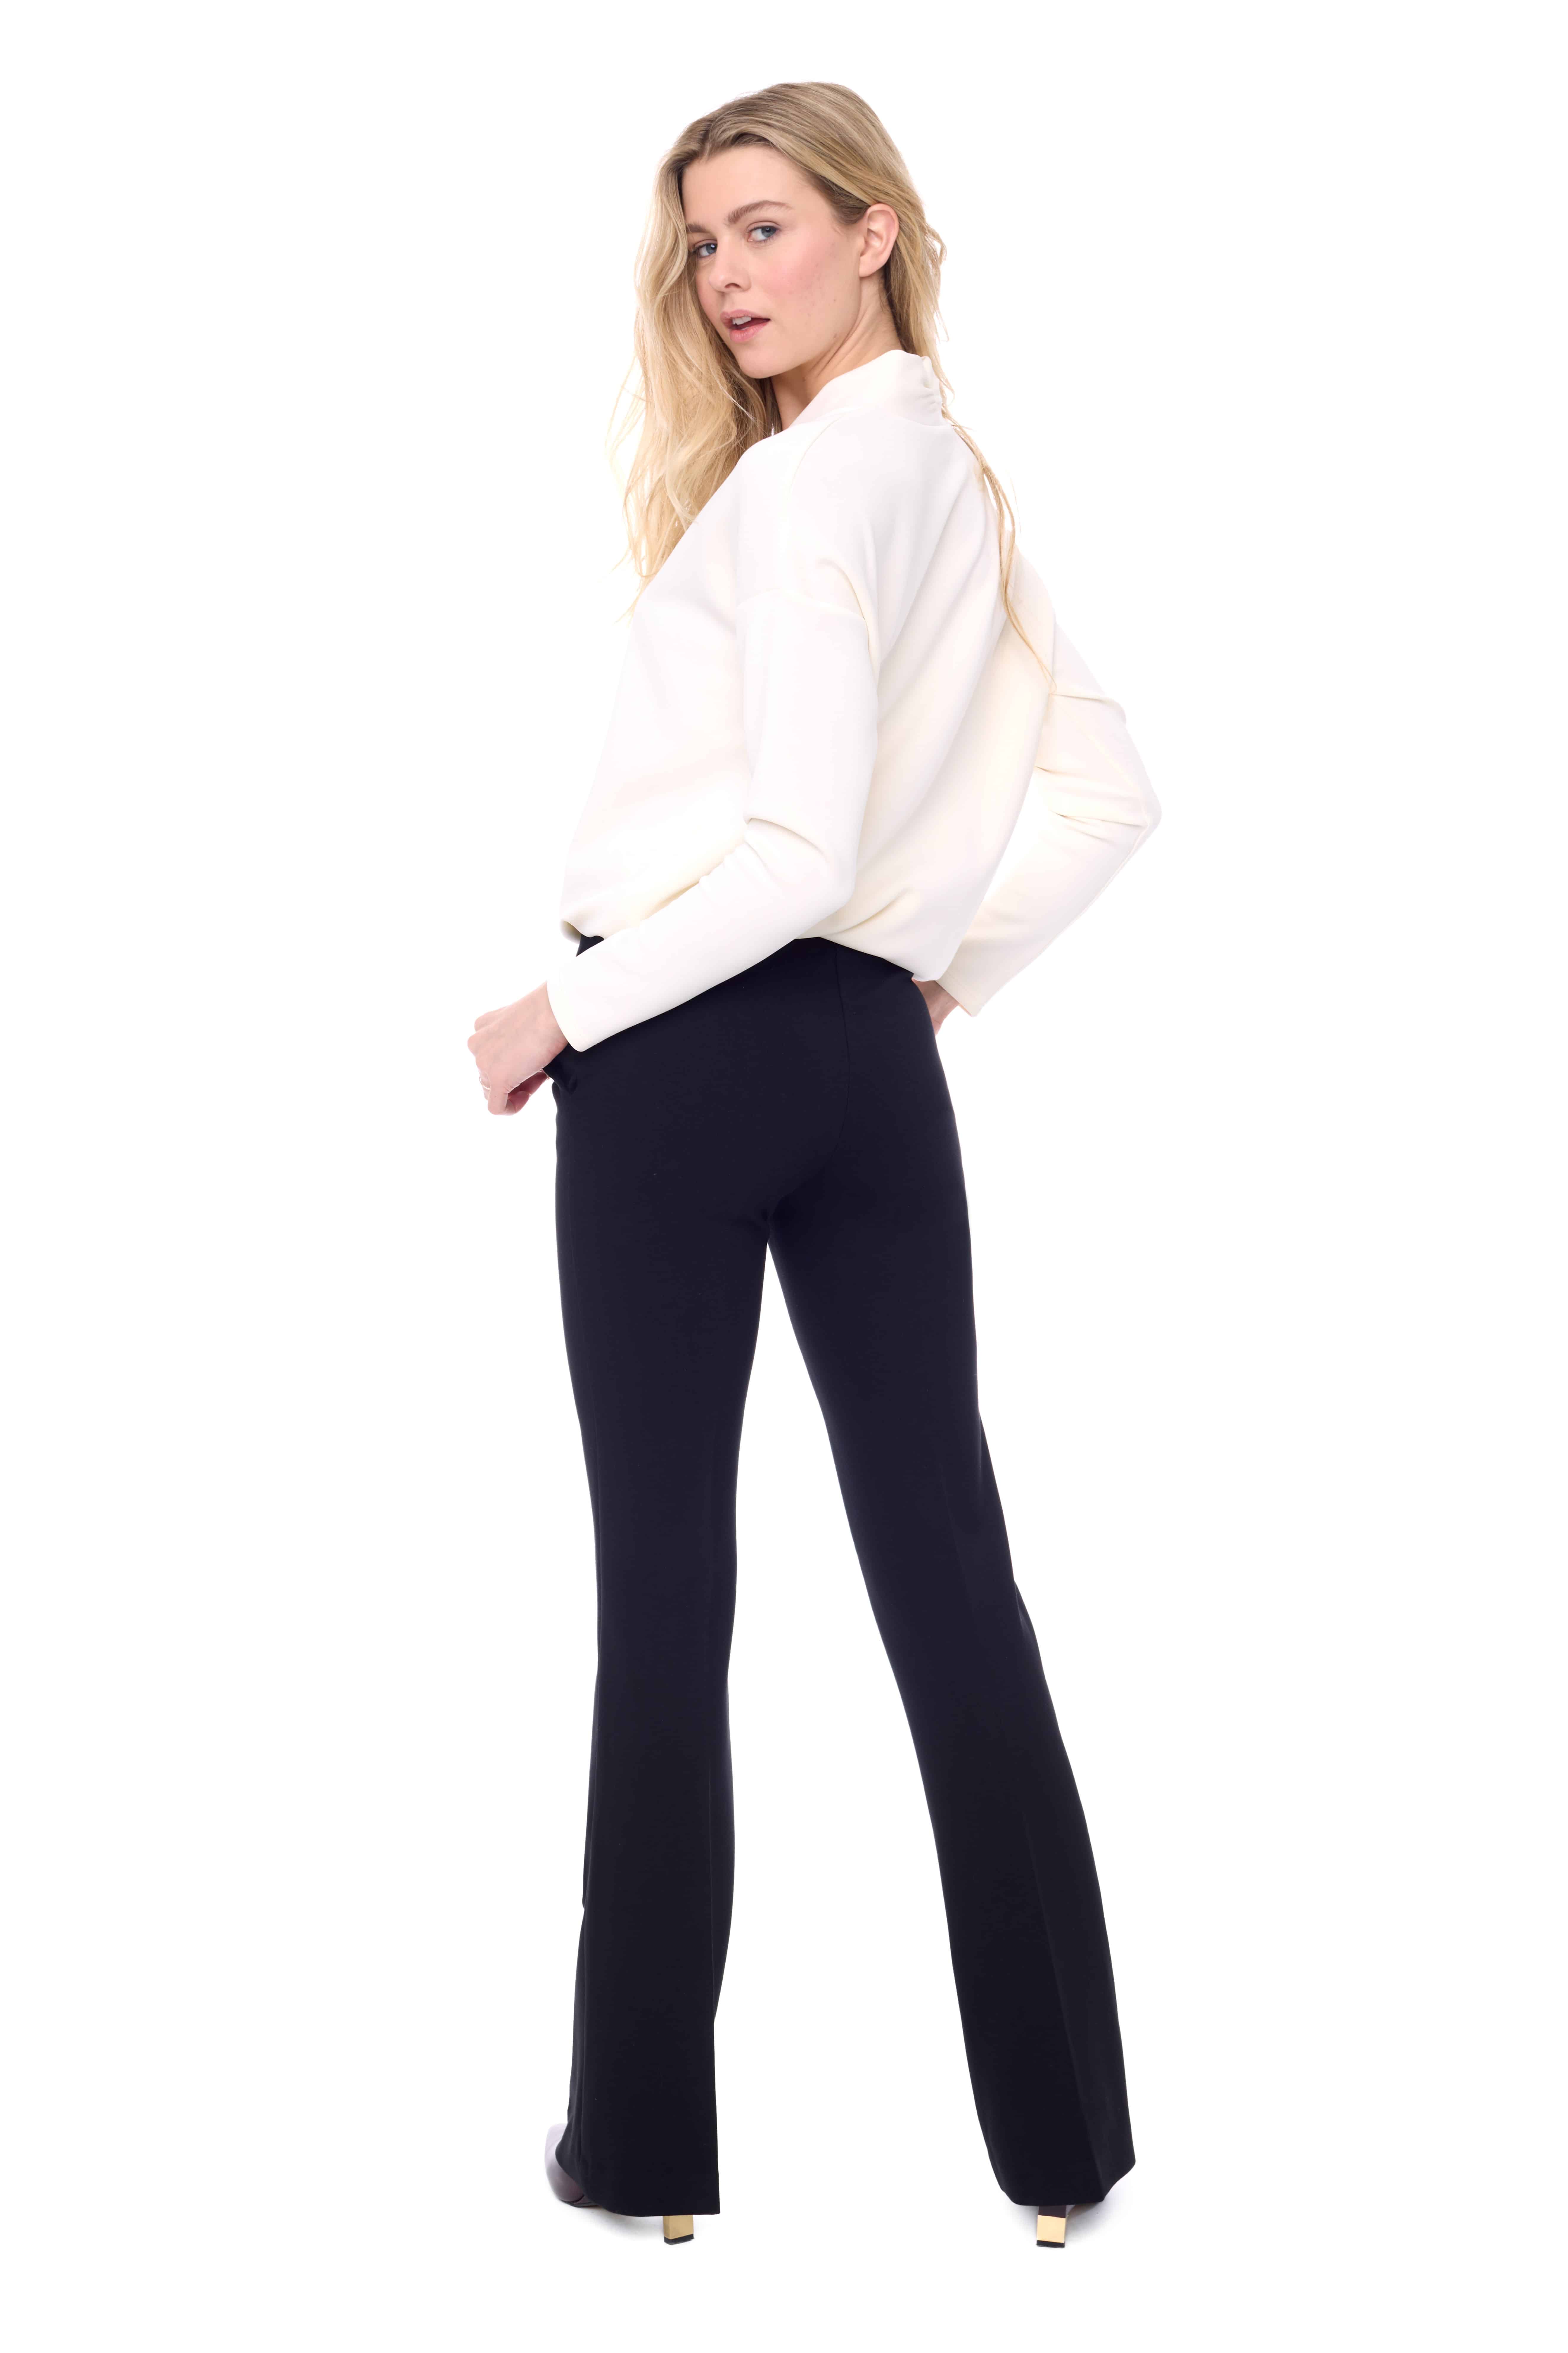 Quince Black Ultra-Stretch Ponte Bootcut Pant NWT size XL